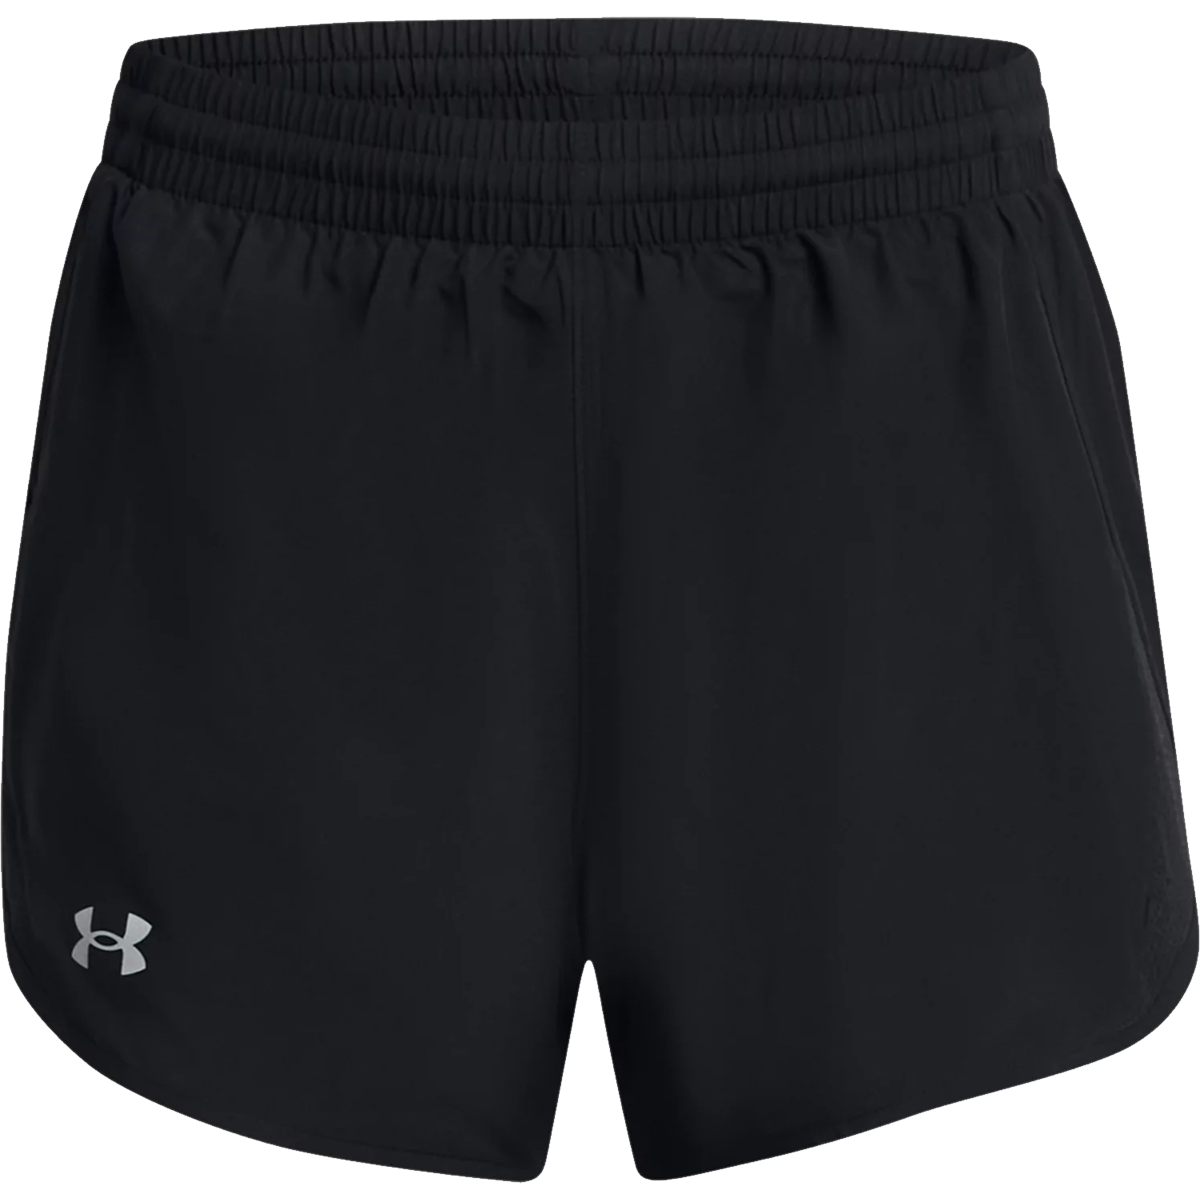 Women's Fly By 2-in-1 Shorts alternate view